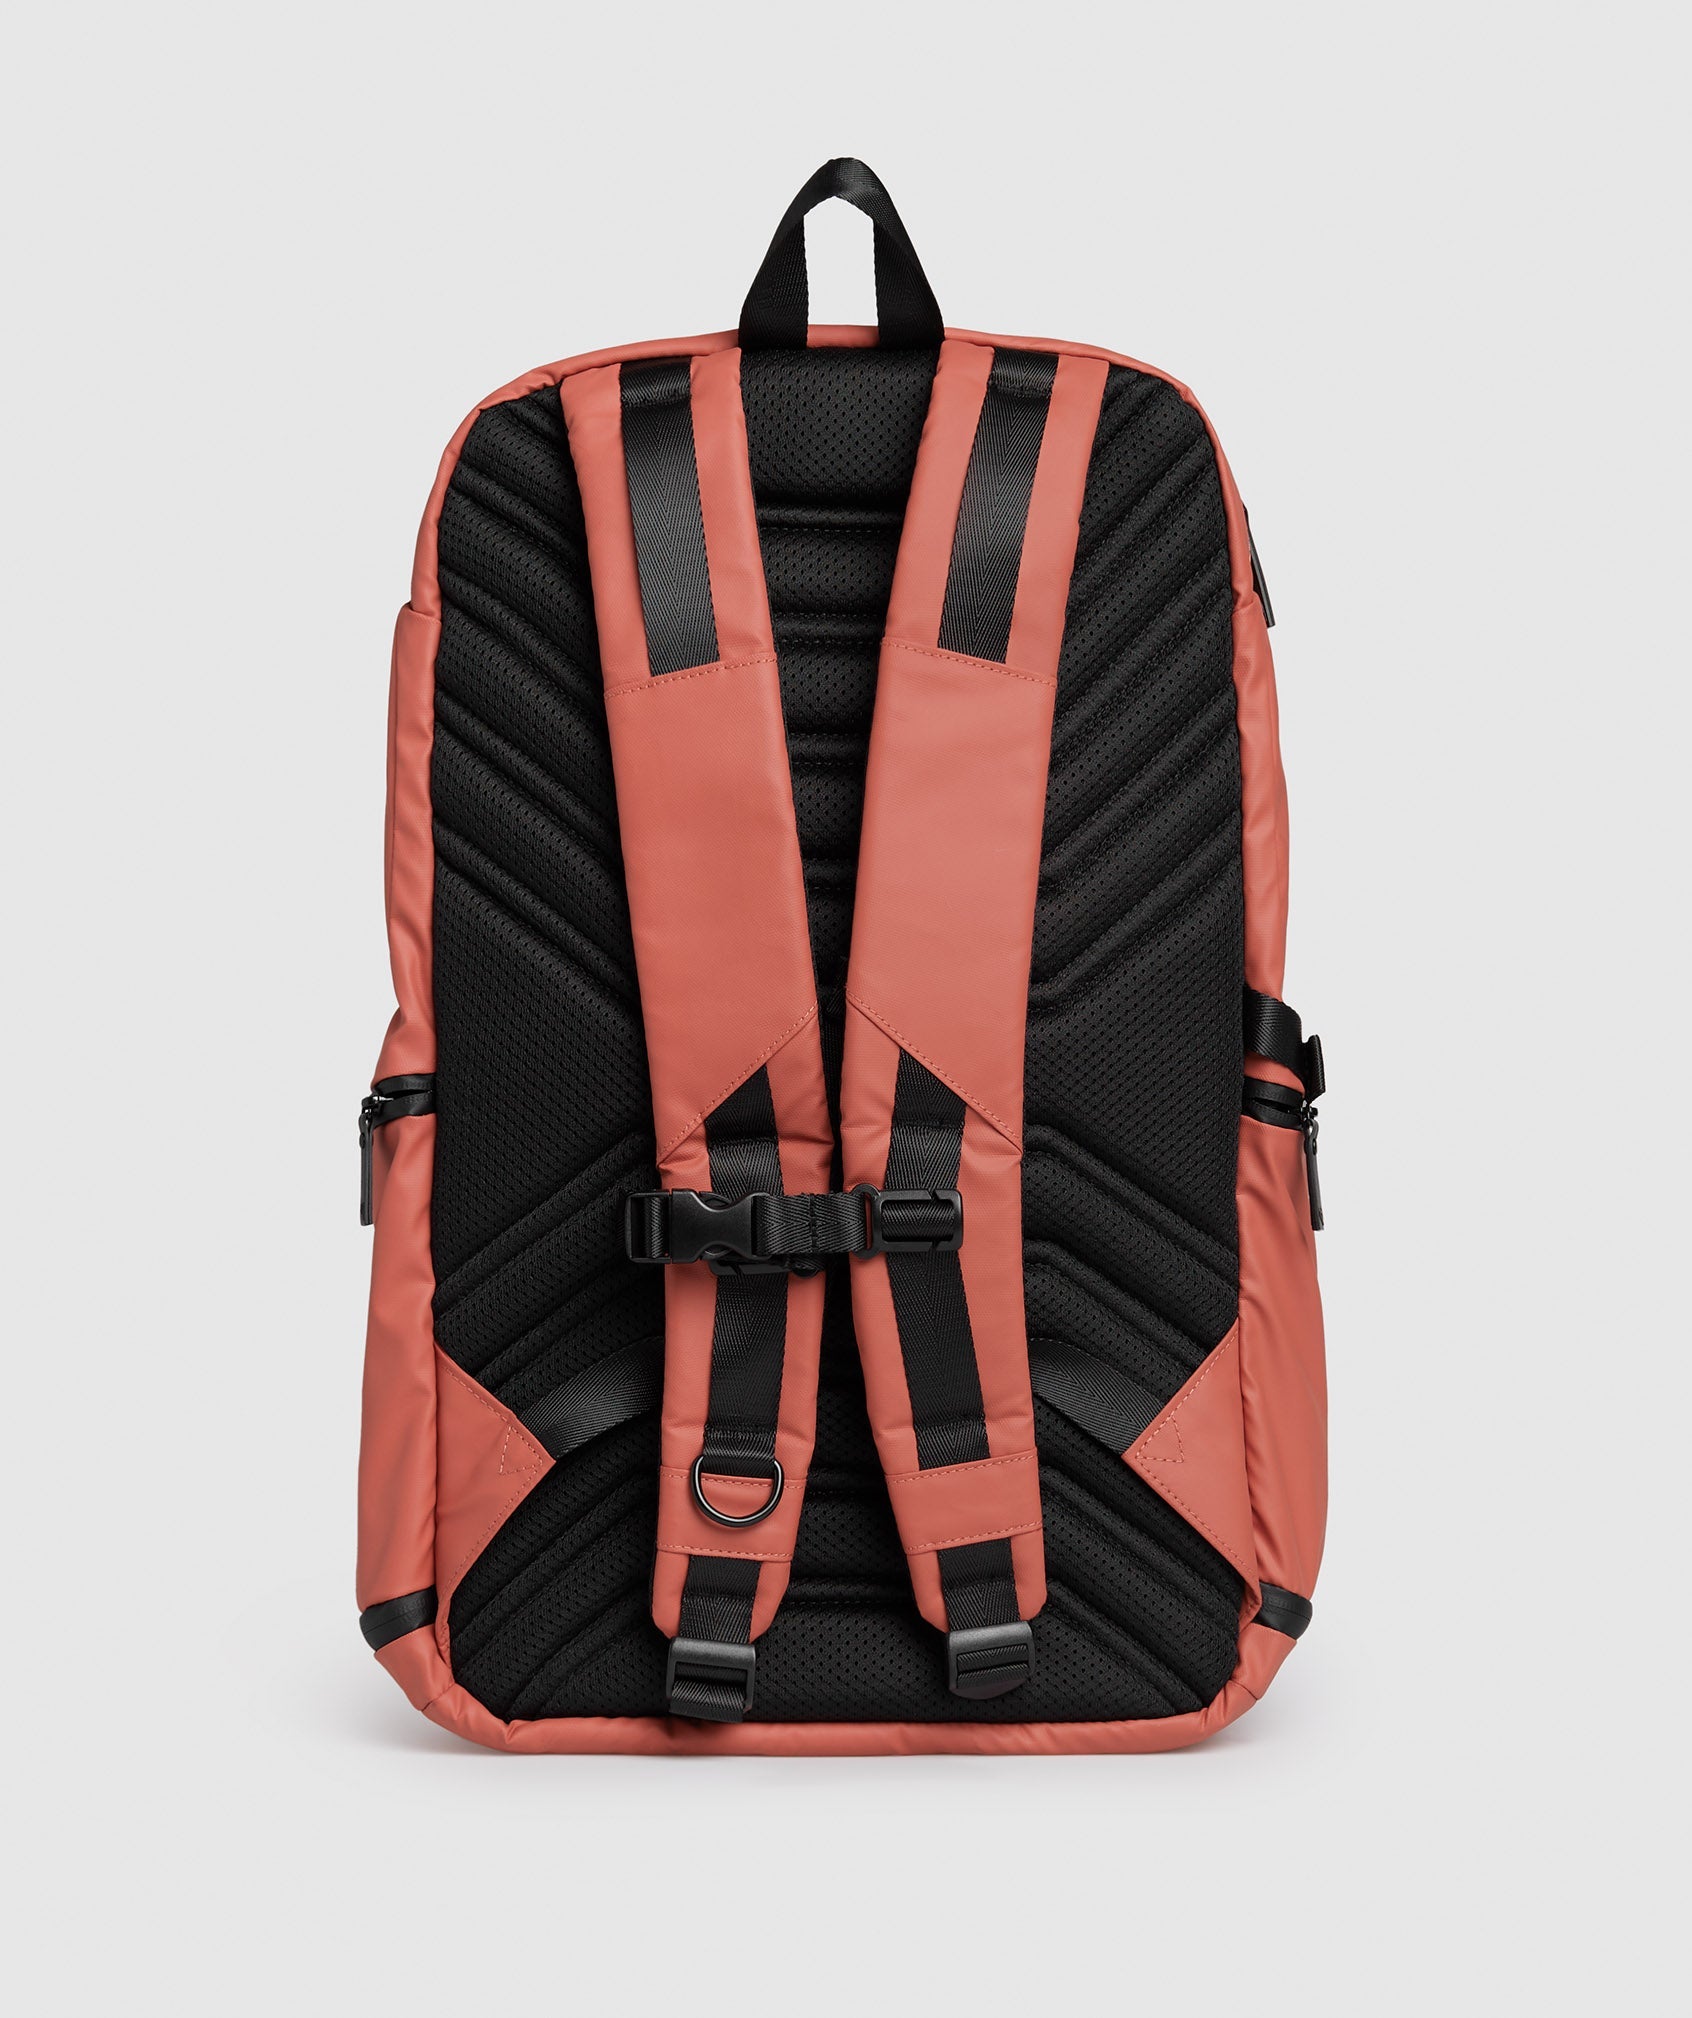 X-Series 0.3 Backpack in Persimmon Red - view 5